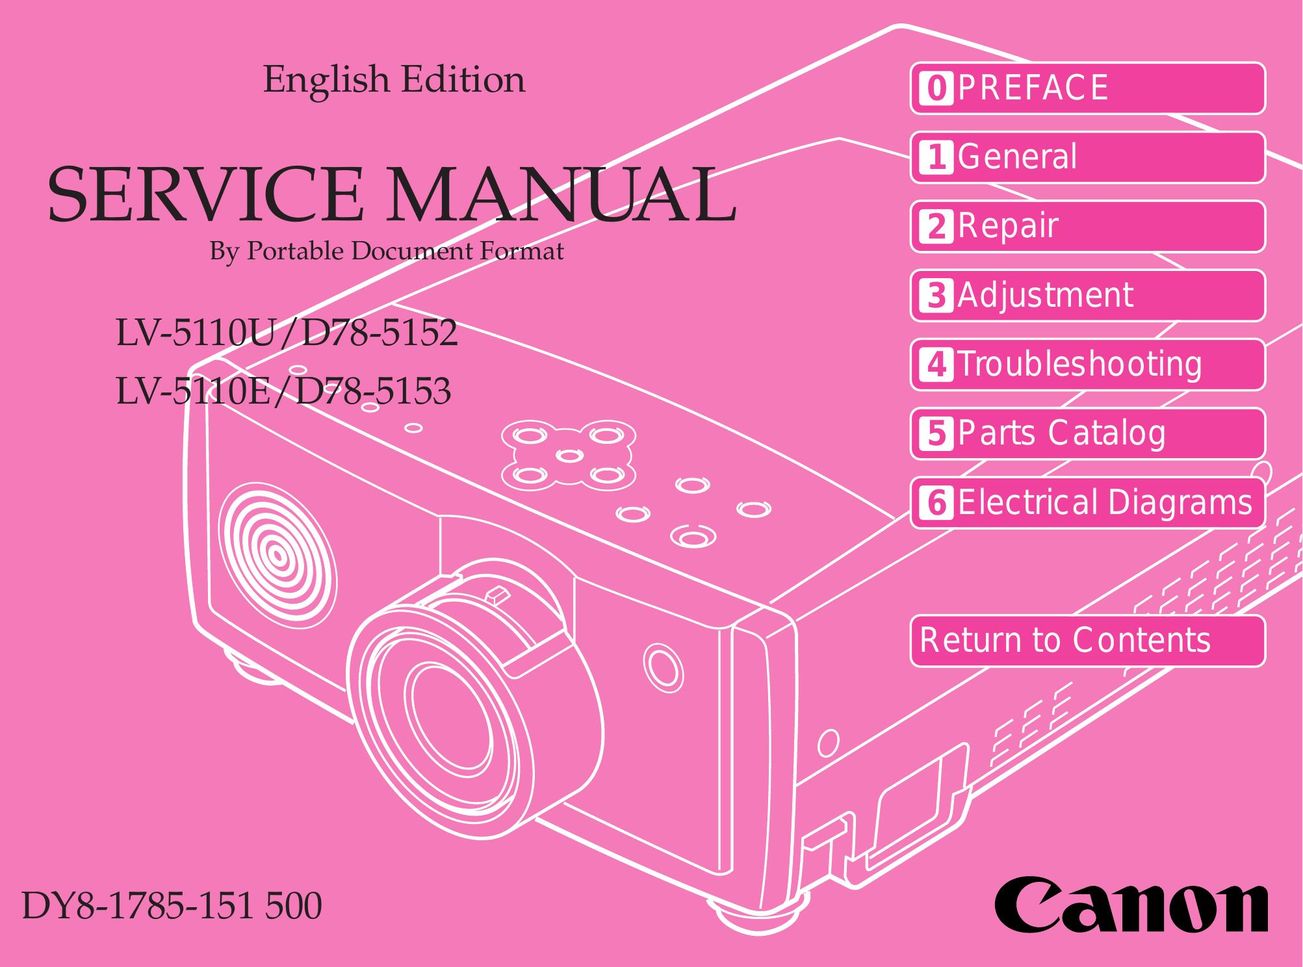 Canon D78-5153 Projector User Manual